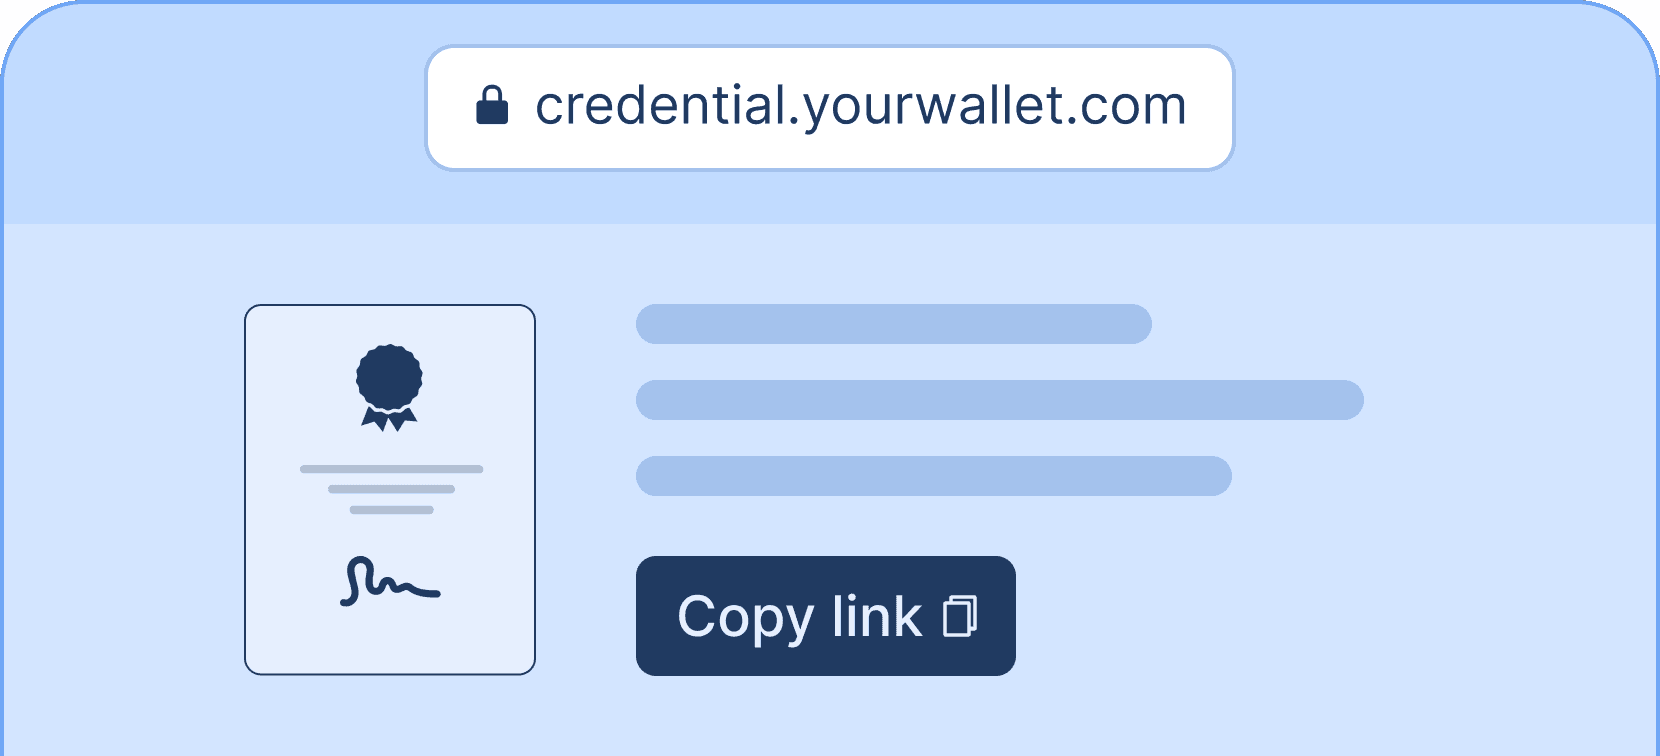 Create shareable credential urls - Certifier features